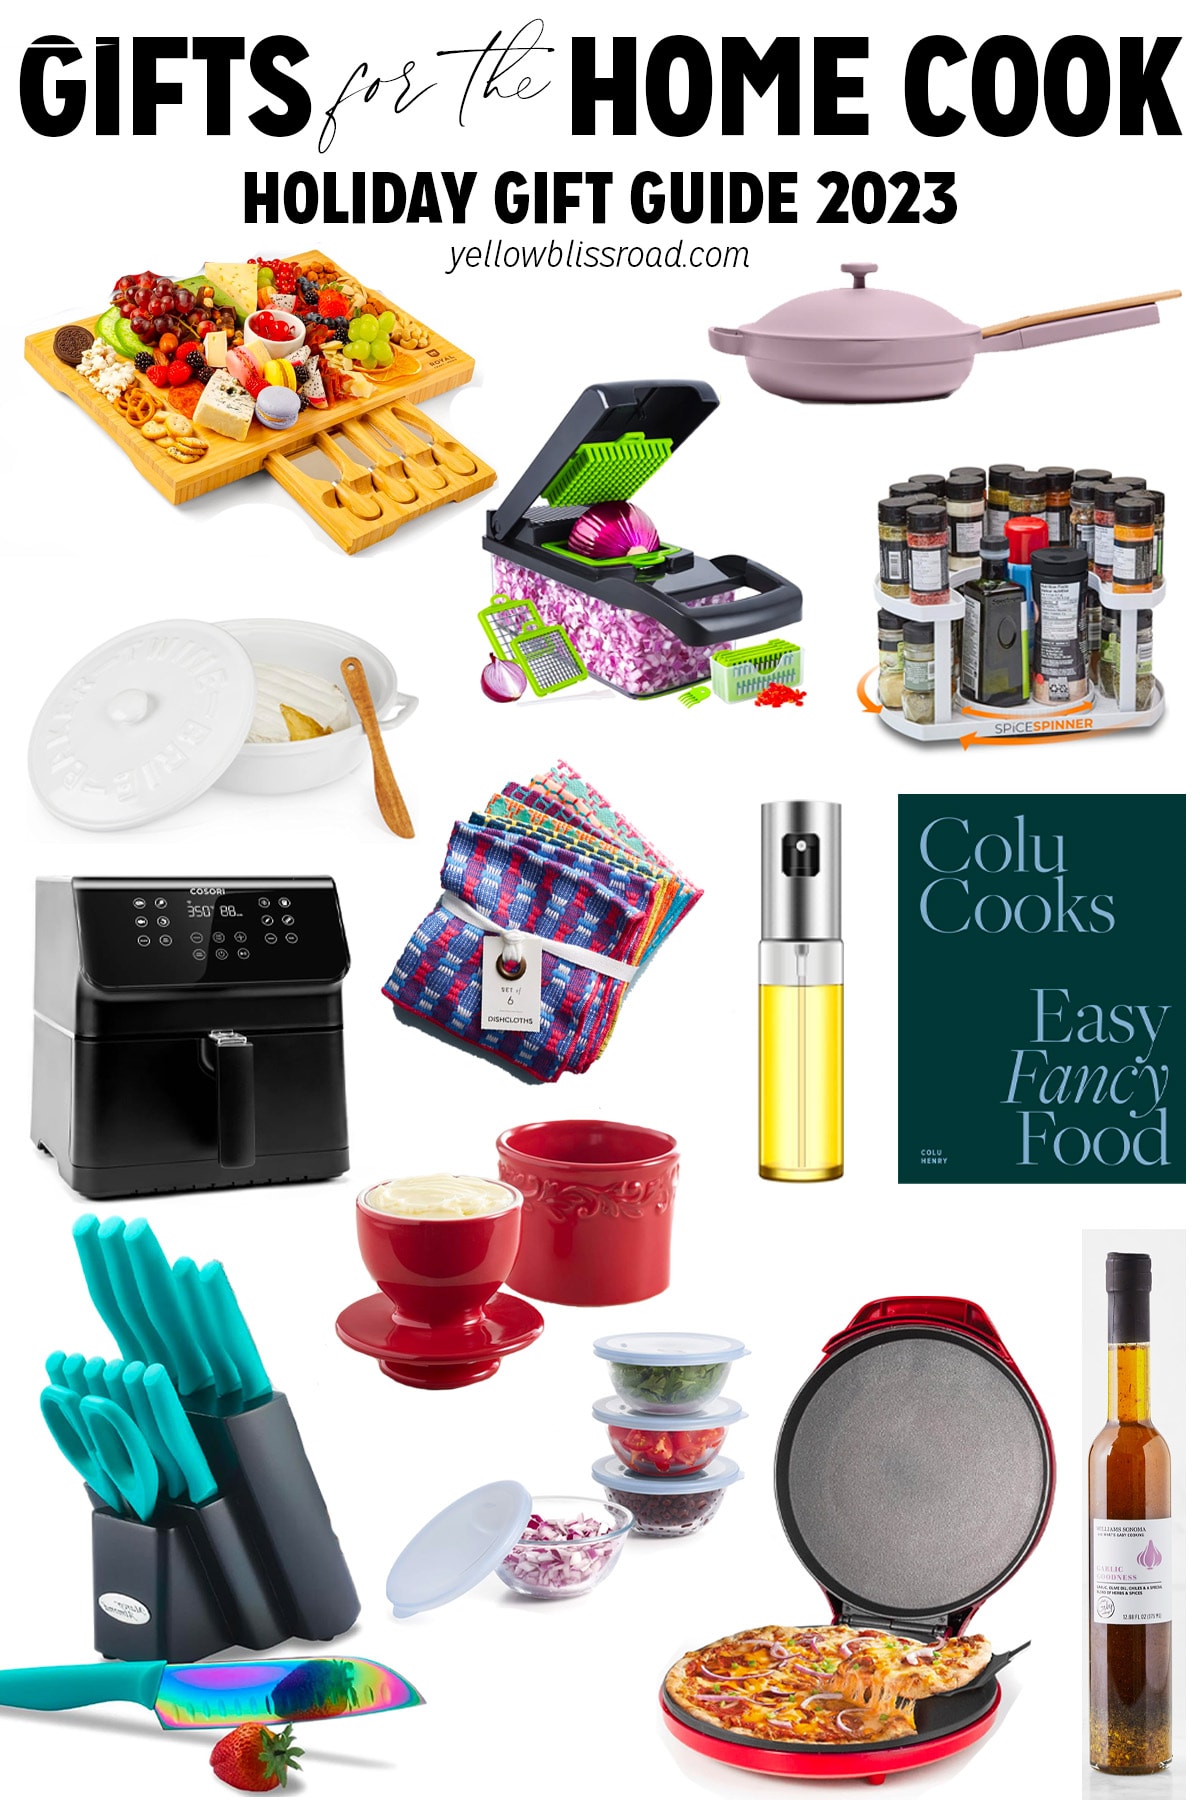 A Unique Home and Kitchen Gift Guide for 2023